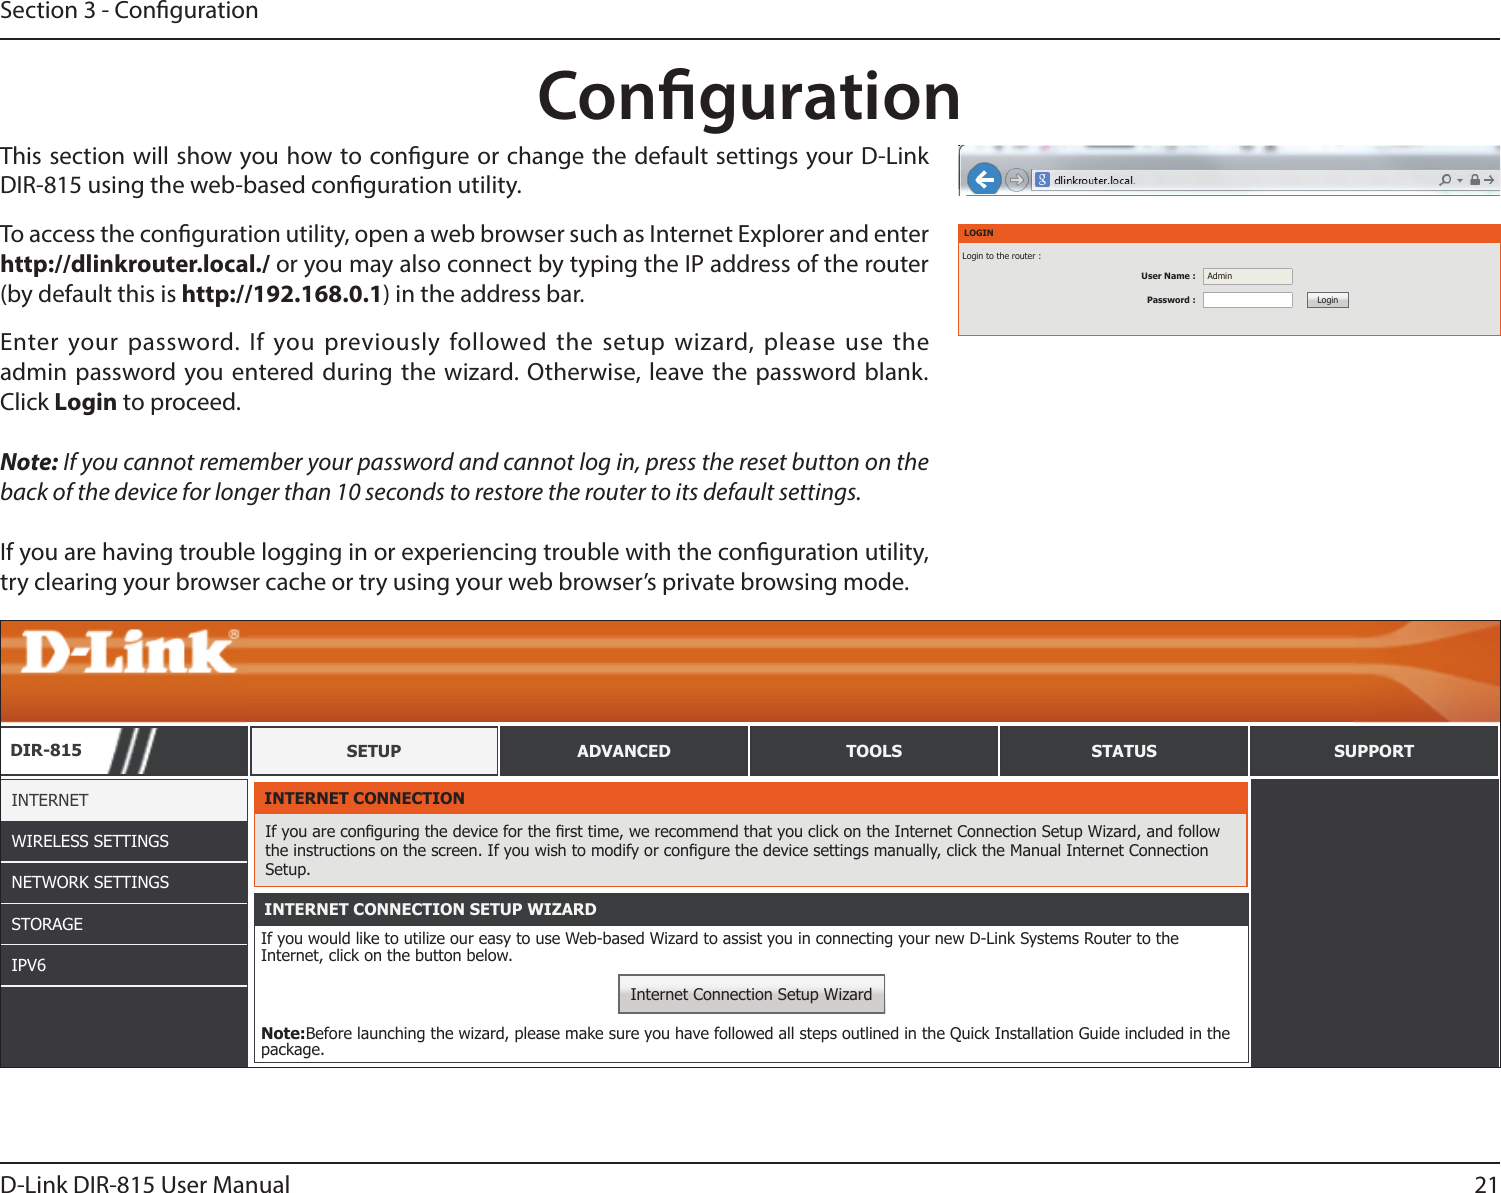 21D-Link DIR-815 User ManualSection 3 - CongurationThis section will show you how to congure or change the default settings your D-Link DIR-815 using the web-based conguration utility. CongurationTo access the conguration utility, open a web browser such as Internet Explorer and enter http://dlinkrouter.local./ or you may also connect by typing the IP address of the router (by default this is http://192.168.0.1) in the address bar.LOGINLogin to the router :User Name : AdminPassword : LoginEnter your password. If you previously followed the setup wizard, please use the admin password you entered during the wizard. Otherwise, leave the password blank.  Click Login to proceed.Note: If you cannot remember your password and cannot log in, press the reset button on the back of the device for longer than 10 seconds to restore the router to its default settings.If you are having trouble logging in or experiencing trouble with the conguration utility, try clearing your browser cache or try using your web browser’s private browsing mode.DIR-815 SETUP ADVANCED TOOLS STATUS SUPPORTINTERNETWIRELESS SETTINGSNETWORK SETTINGSSTORAGEIPV6INTERNET CONNECTIONIf you are conguring the device for the rst time, we recommend that you click on the Internet Connection Setup Wizard, and follow the instructions on the screen. If you wish to modify or congure the device settings manually, click the Manual Internet Connection Setup.INTERNET CONNECTION SETUP WIZARDIf you would like to utilize our easy to use Web-based Wizard to assist you in connecting your new D-Link Systems Router to the Internet, click on the button below.Internet Connection Setup WizardNote:Before launching the wizard, please make sure you have followed all steps outlined in the Quick Installation Guide included in the package.MANUAL INTERNET CONNECTION OPTIONIf you would like to congure the Internet settings of your new D-Link Router manually, then click on the button below.Manual Internet Connection Setup